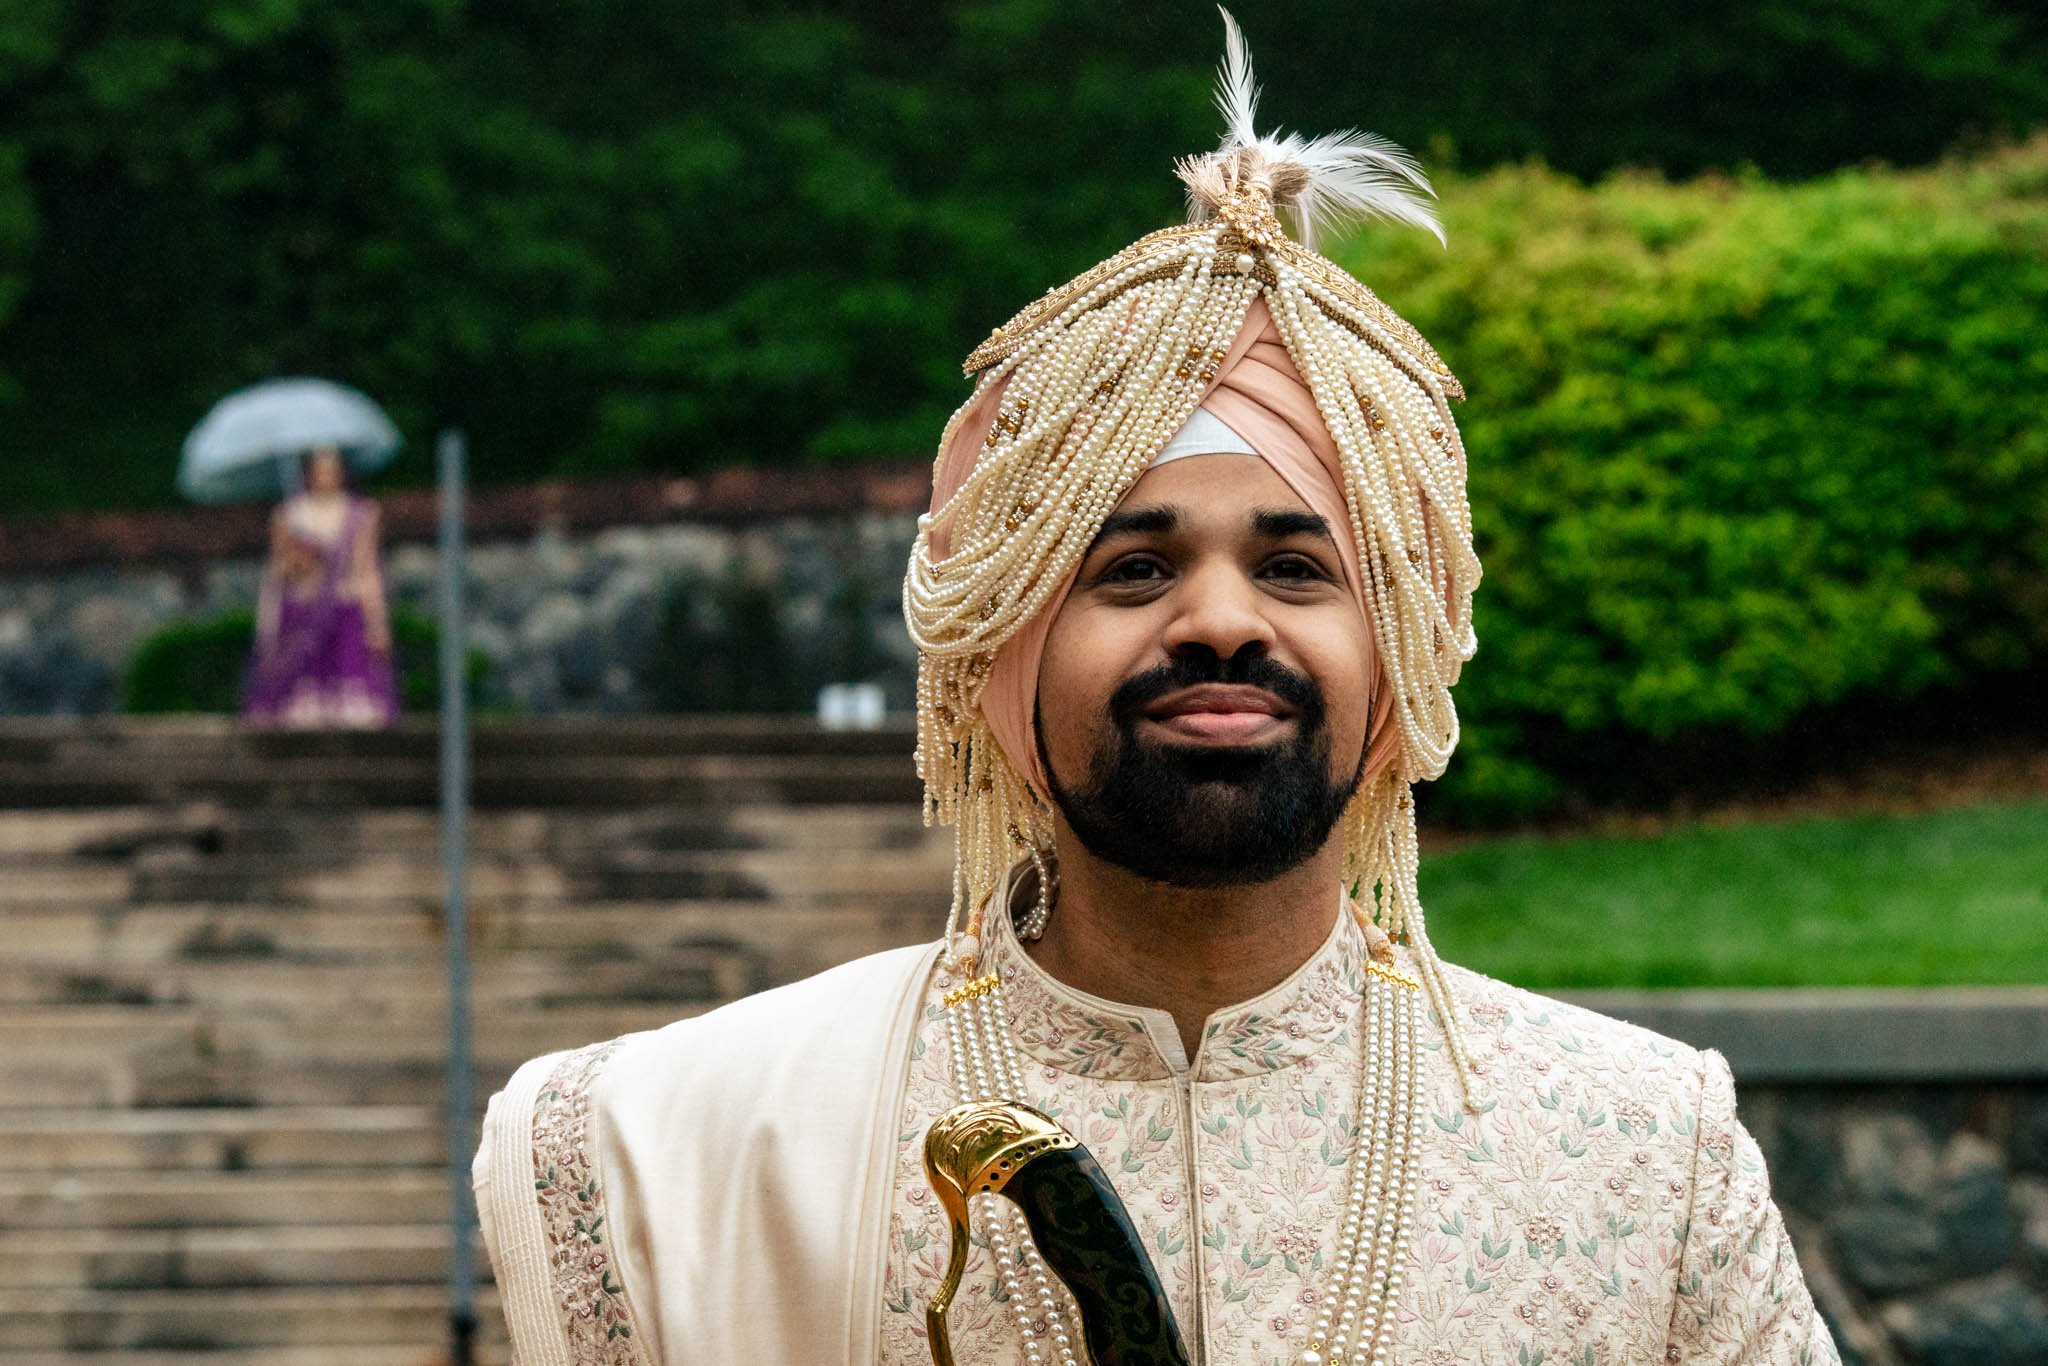 A man in an indian turban poses for a wedding photo at the Biltmore Estate.